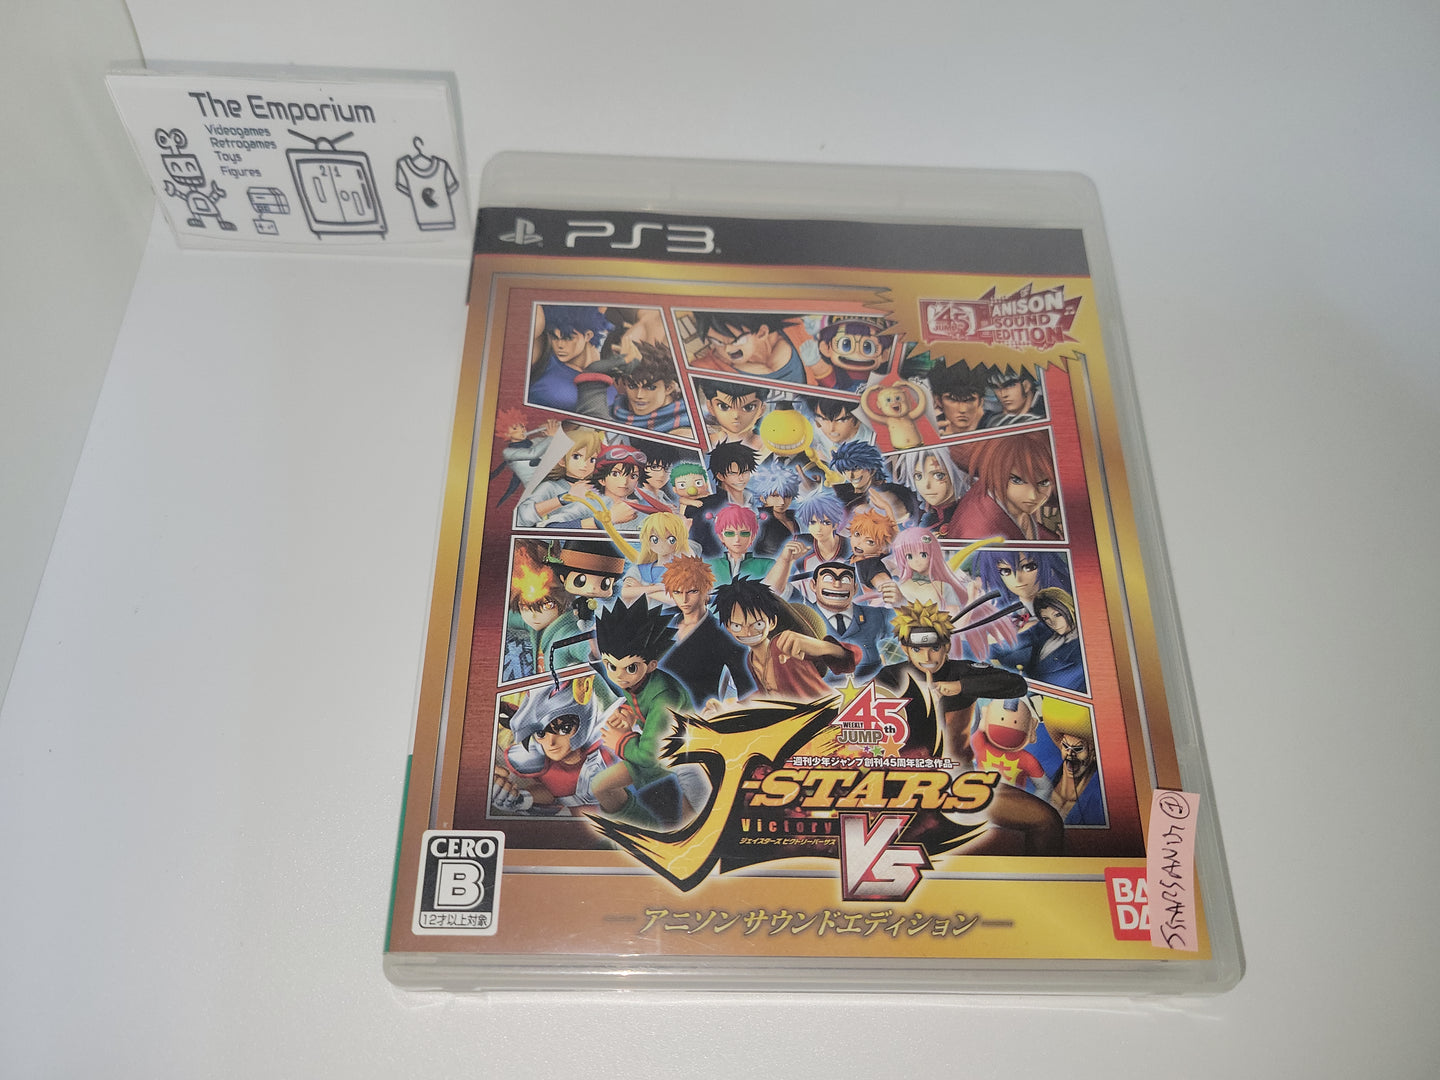 Jump J-stars Victory Versus Anison Version - Sony PS3 Playstation 3